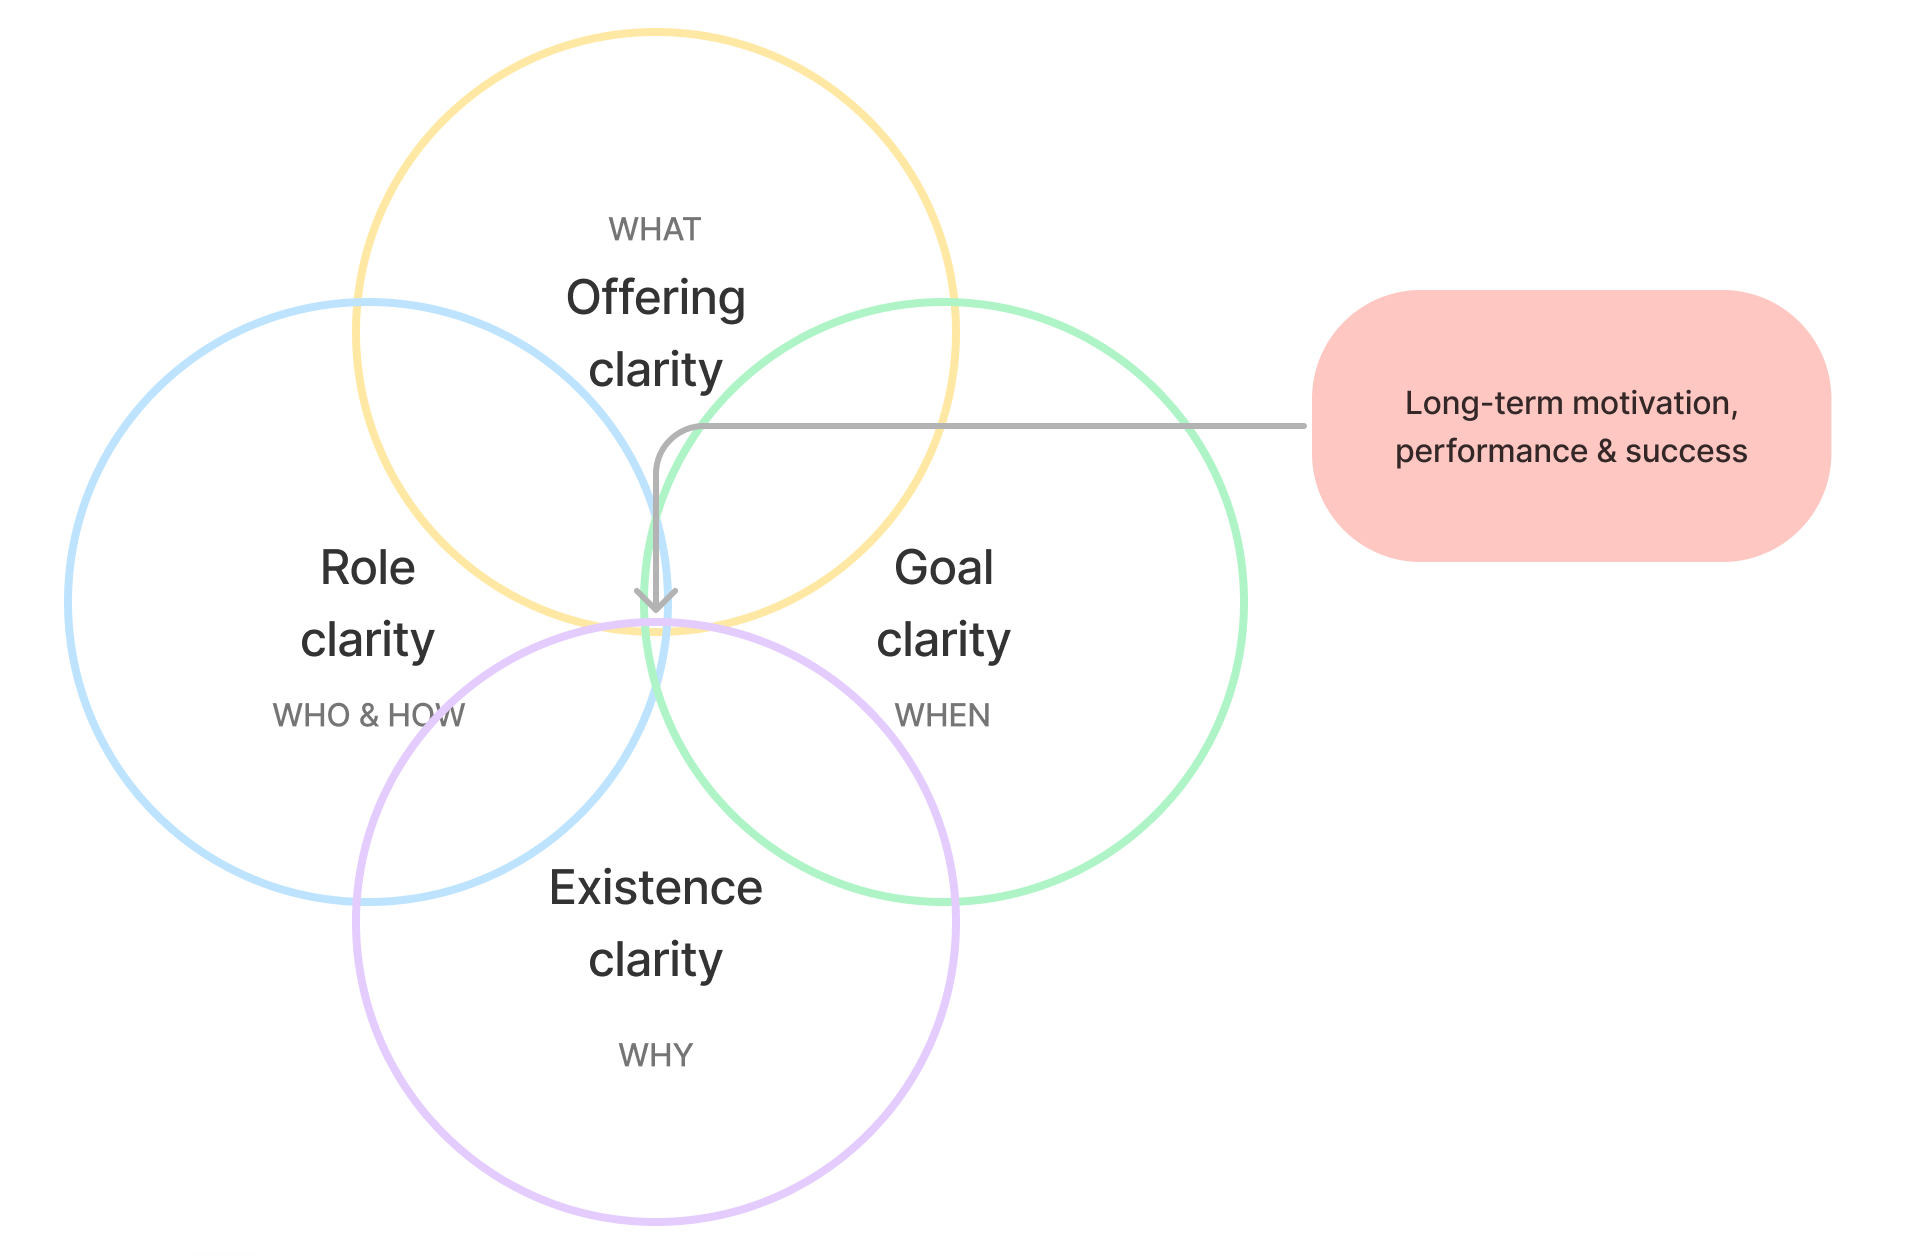 Existence, role and goal clarity depicted as a Venn diagram